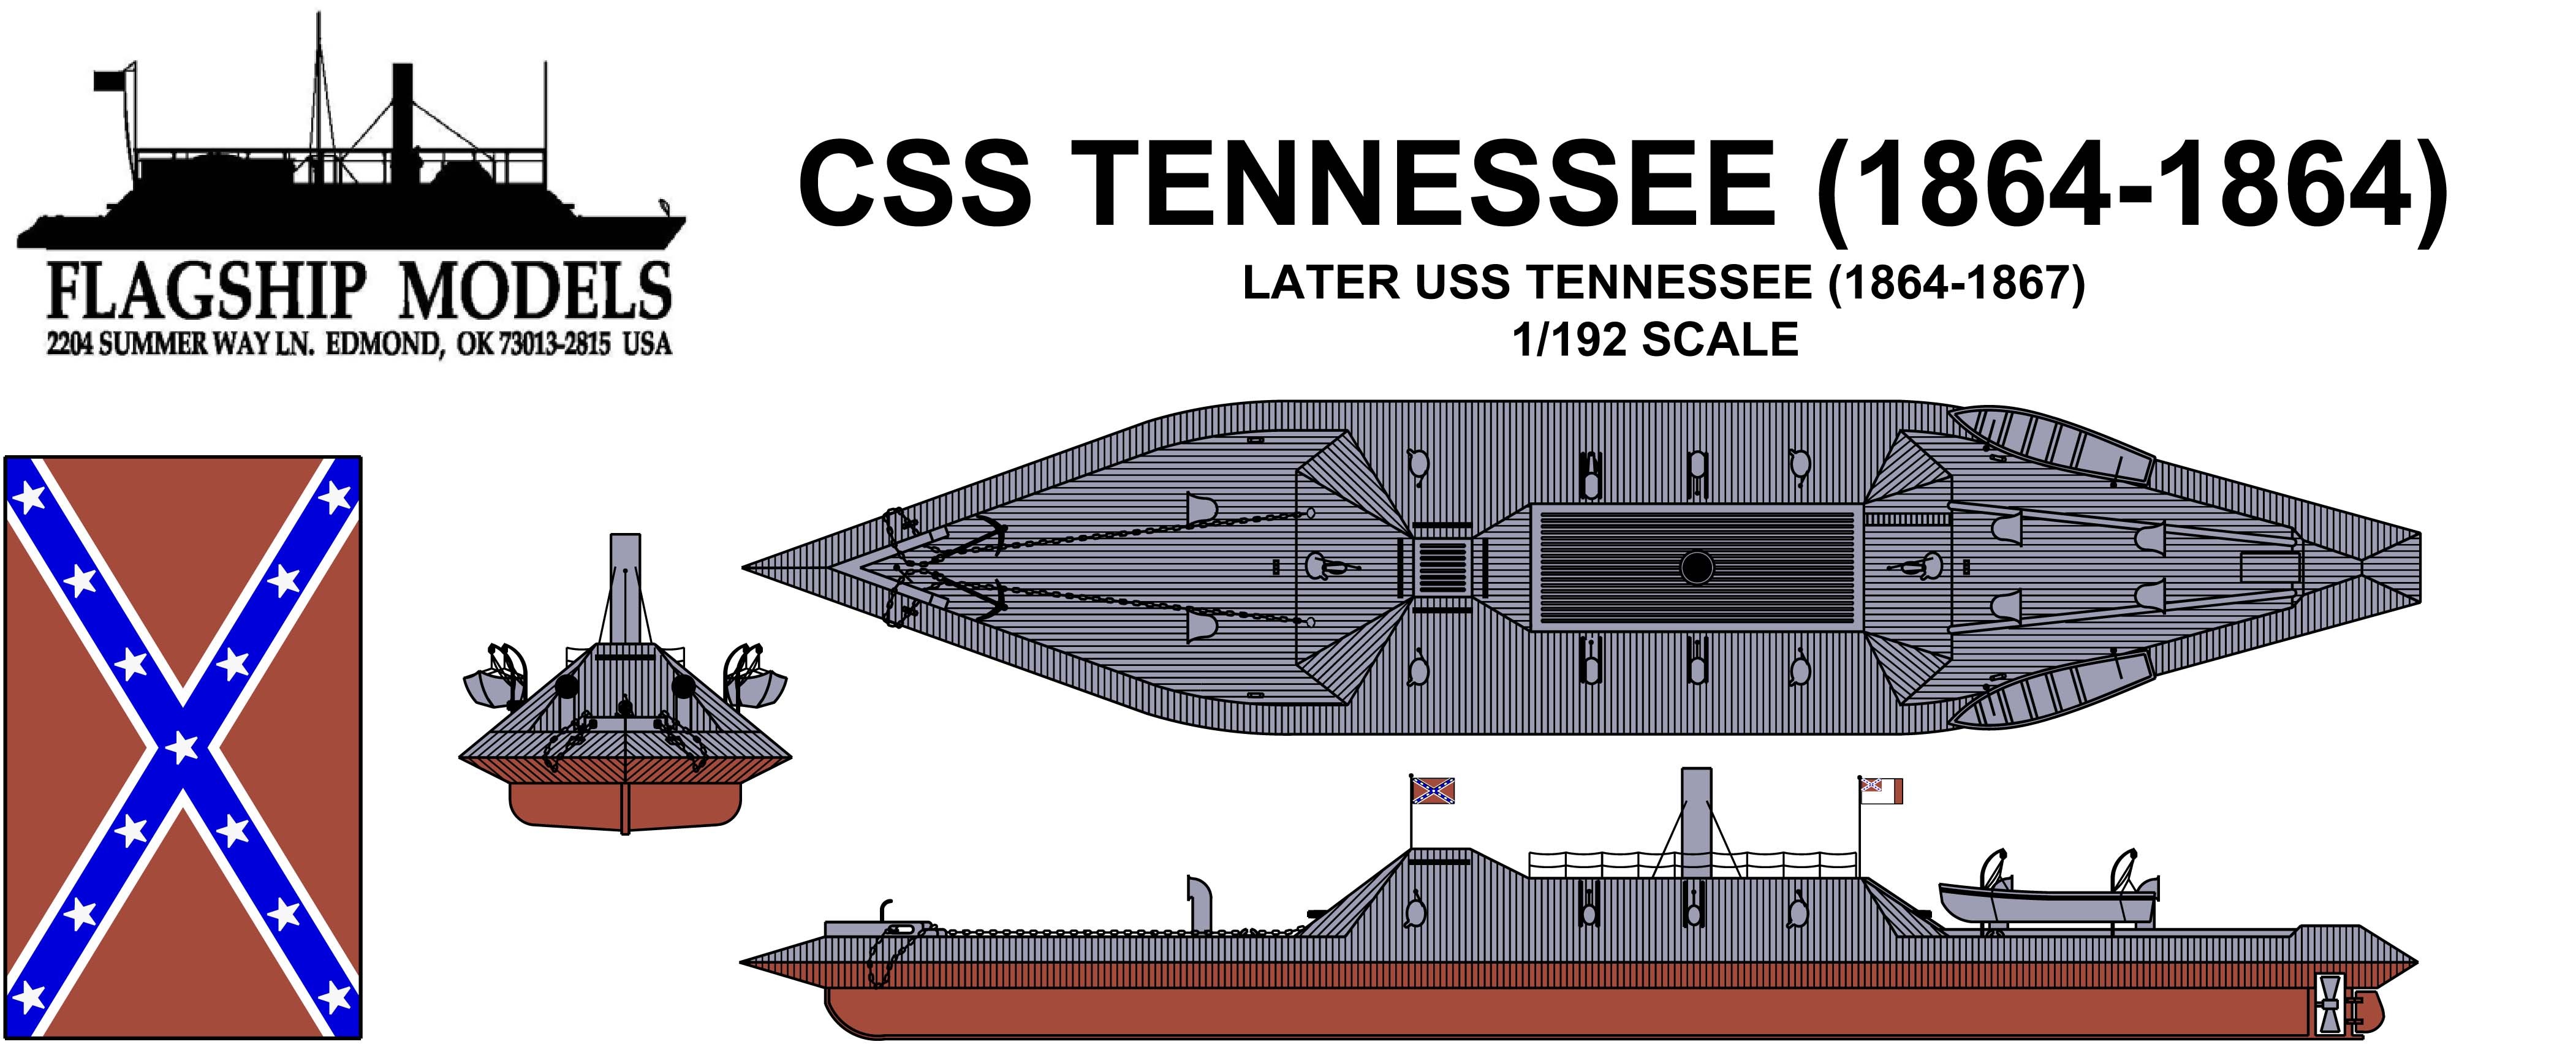 CSS/USS Tennessee (1:192, Flagship Models)